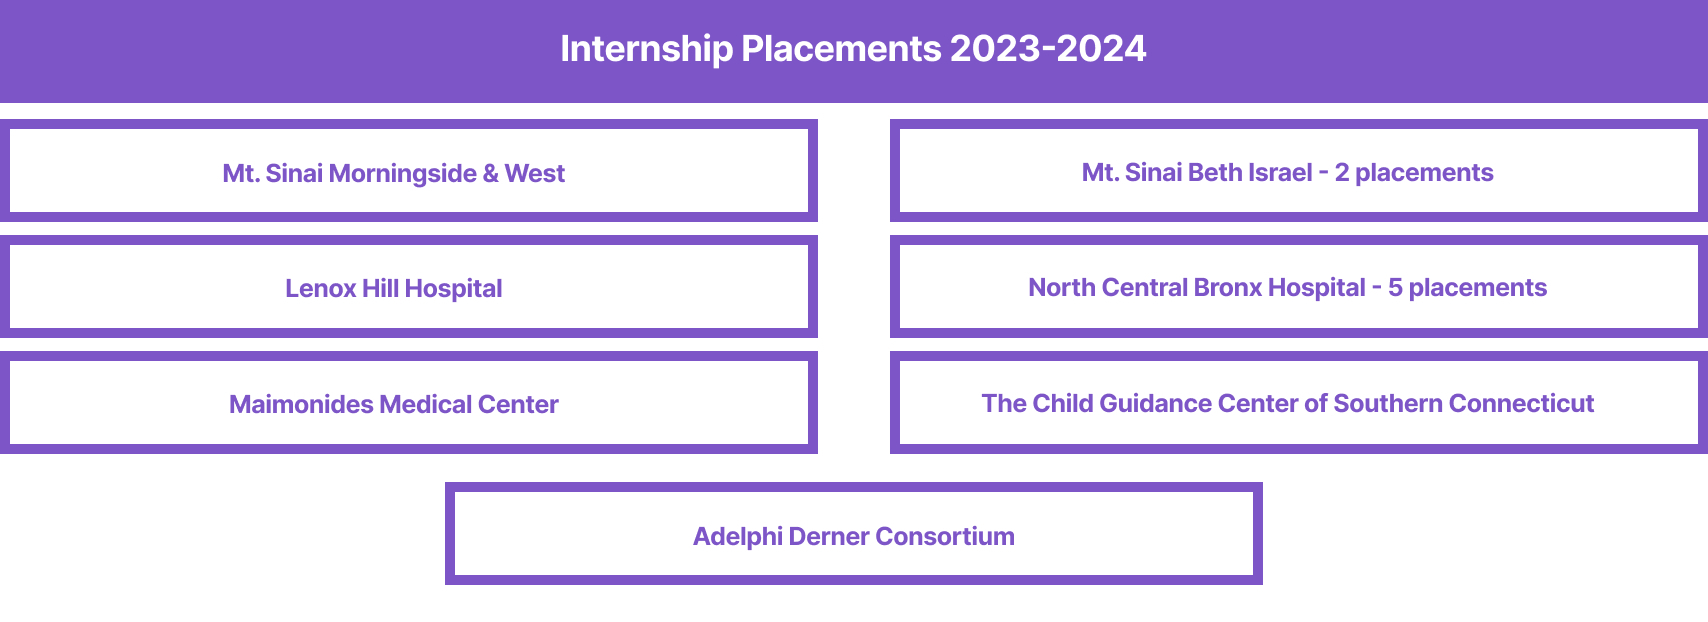 Internship Placements 2023-2024: Mt. Sinai Morningside & West, Lenox Hill Hospital, Maimonides Medical Center, Mt. Sinai Beth Israel - 2 placements, North Central Bronx Hospital - 5 placements, The Child Guidance Center of Southern Connecticut, Adelphi Derner Consortium